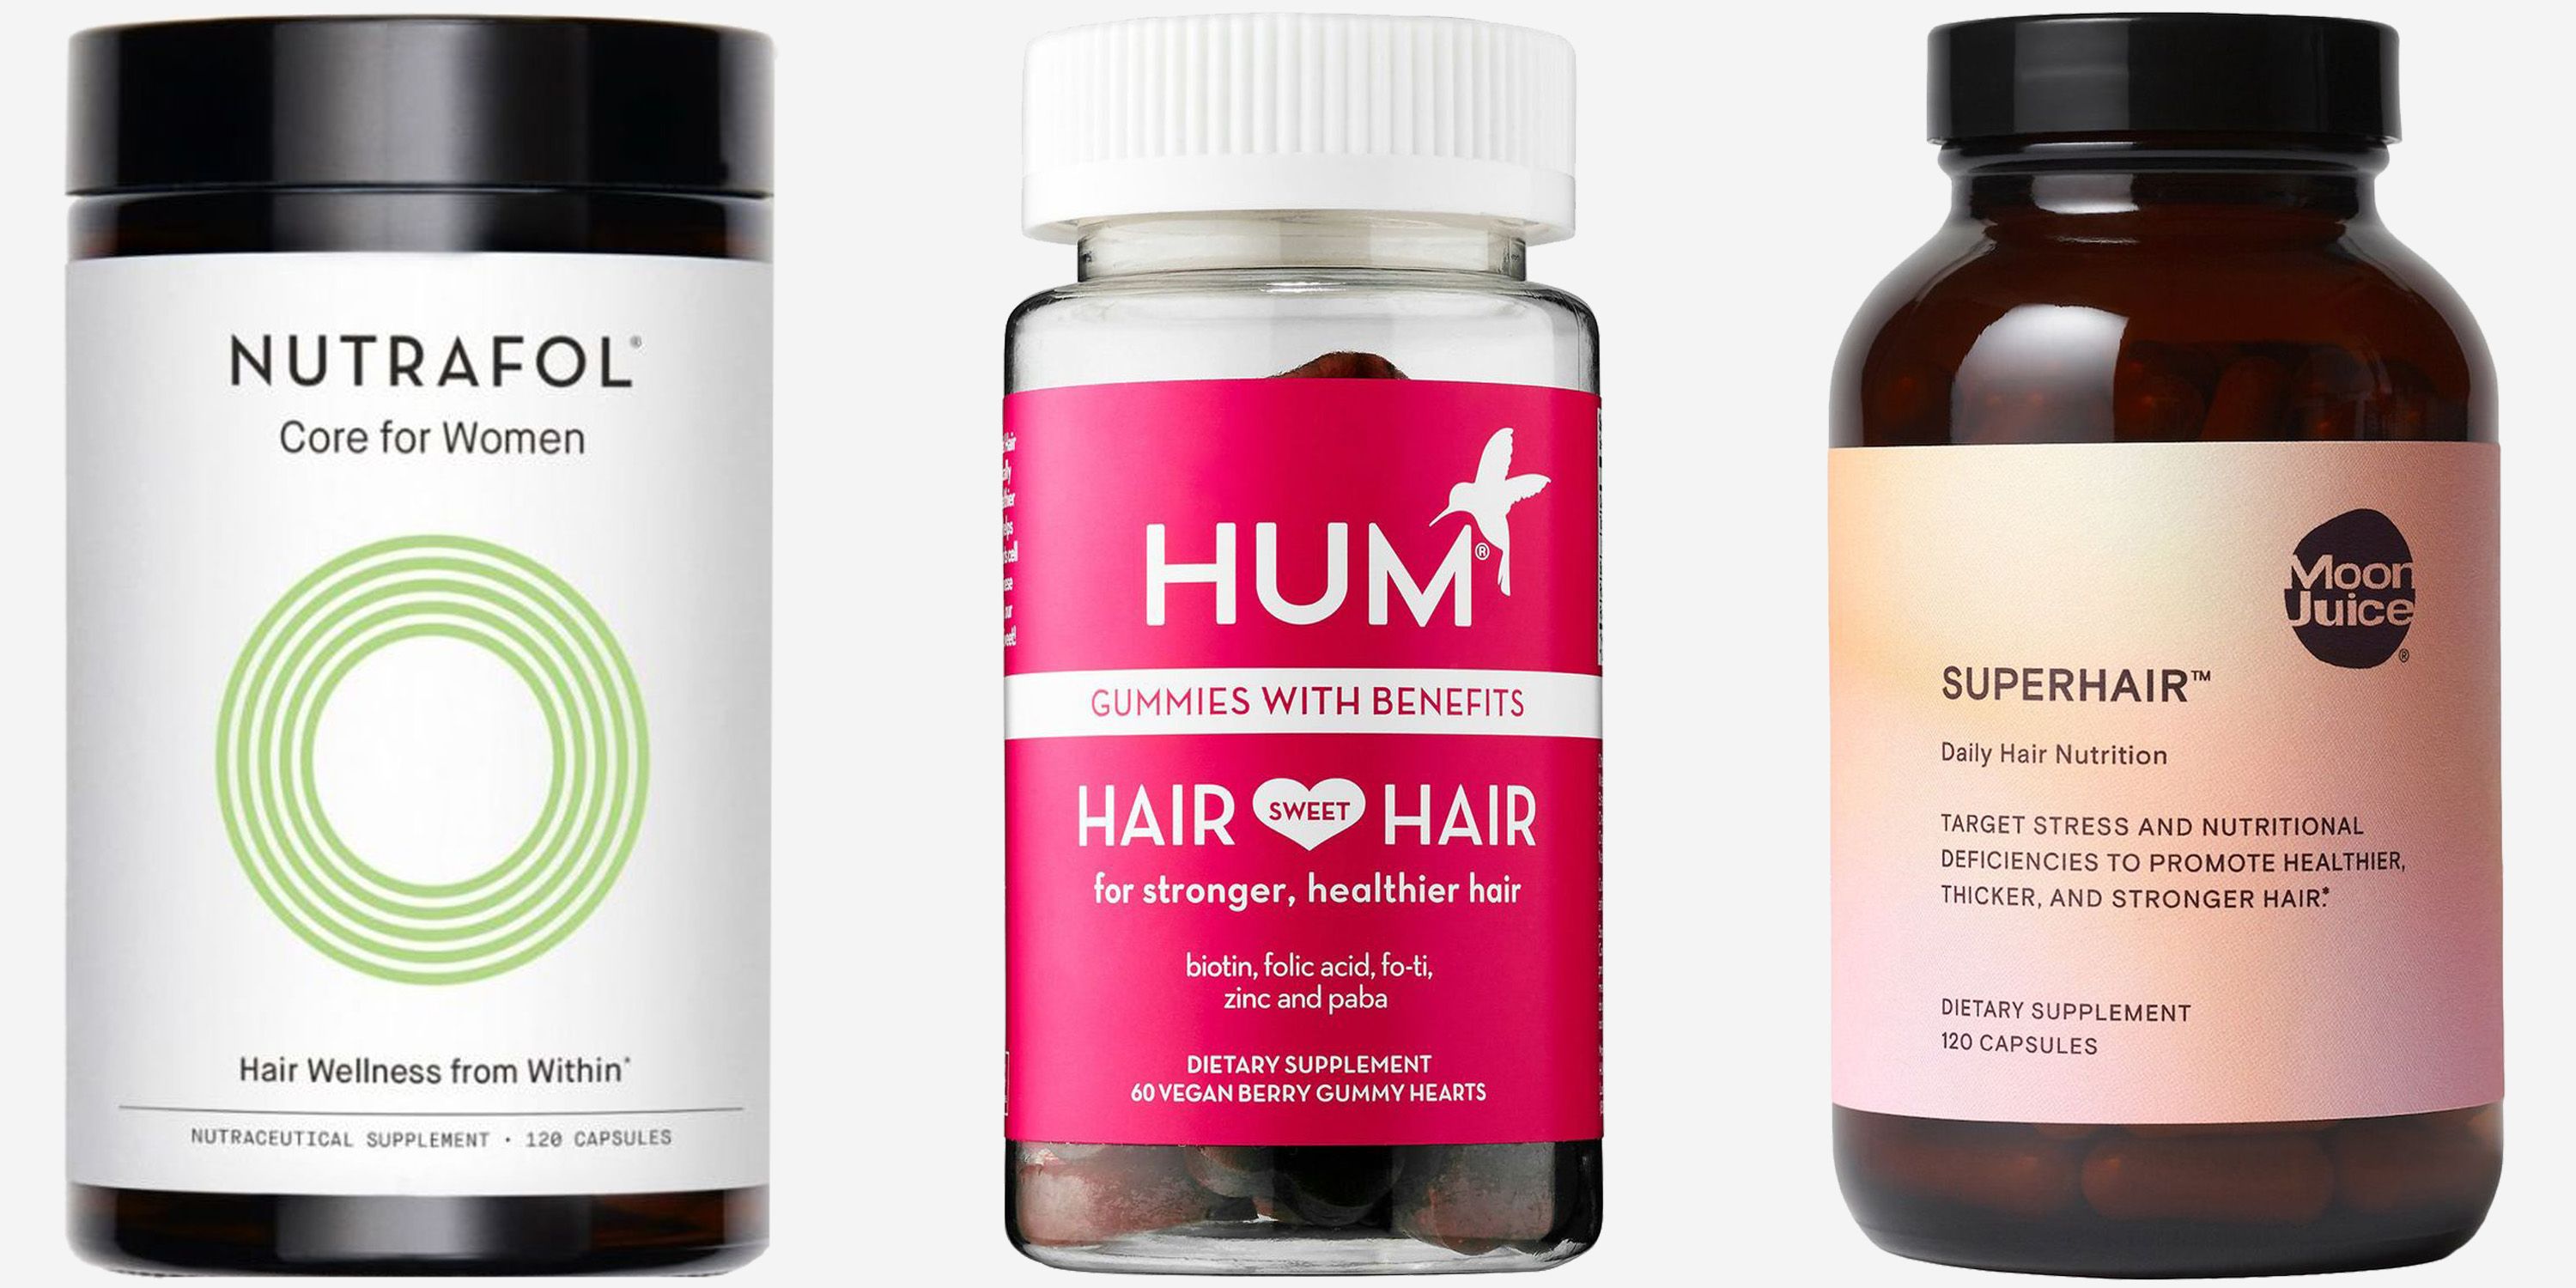 best supplements for hair growth and thickness